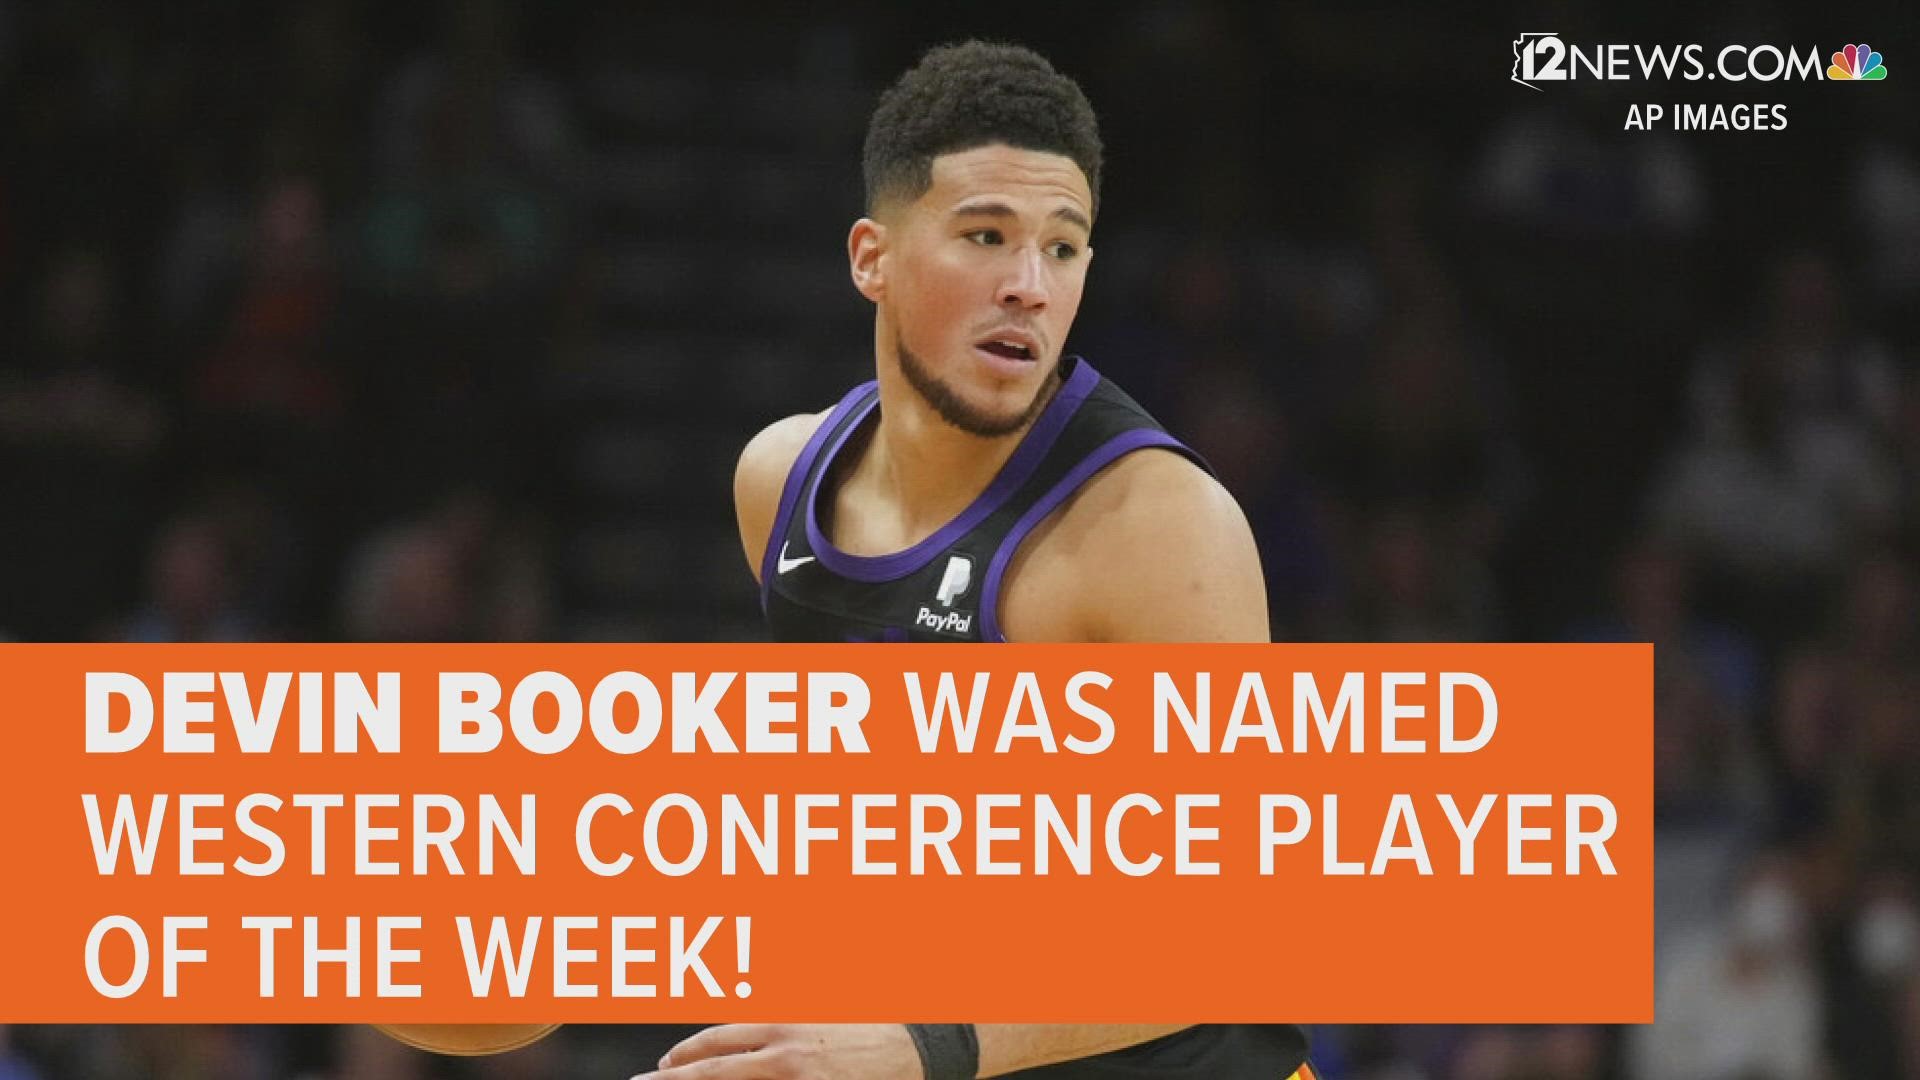 Devin Booker Is Climbing the Ladder. Will the Phoenix Suns Catch